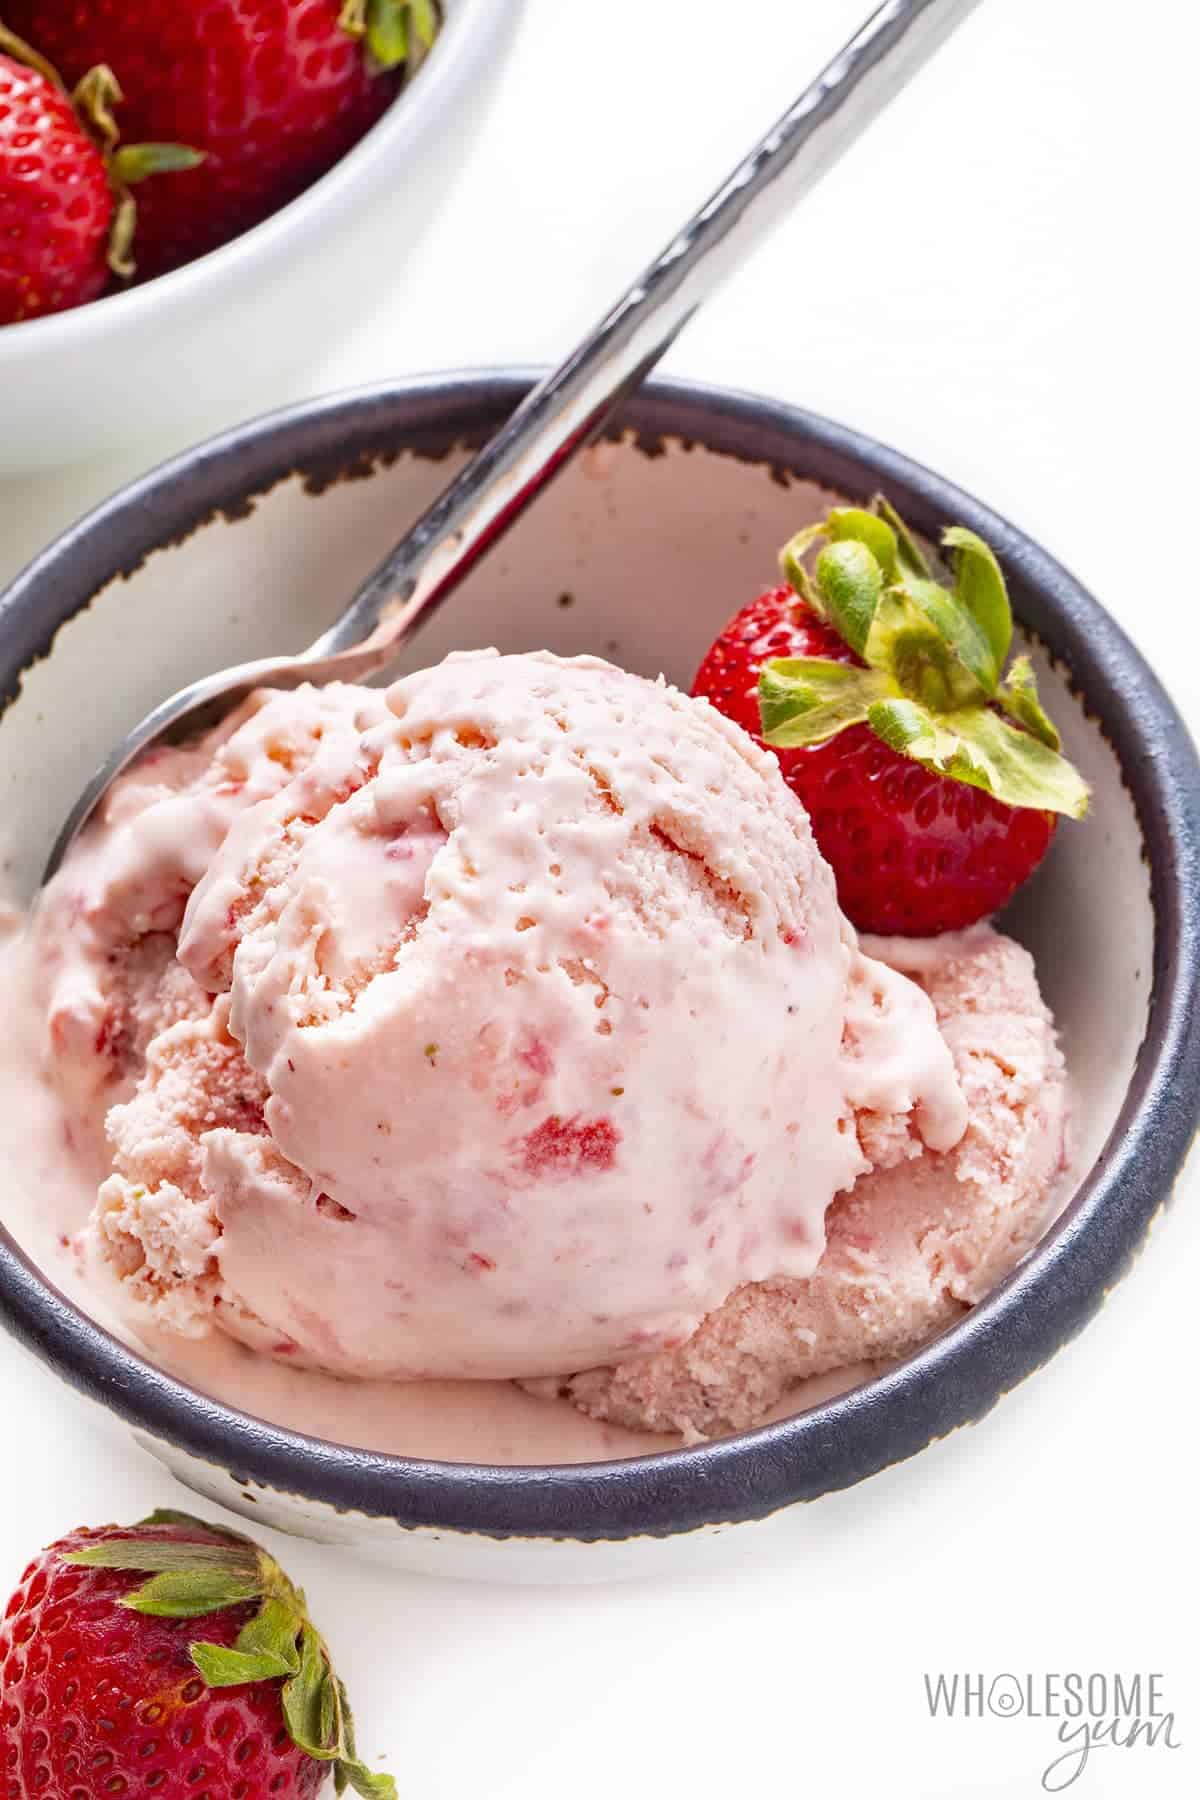 Side view of ice cream in a dish with strawberry garnish.